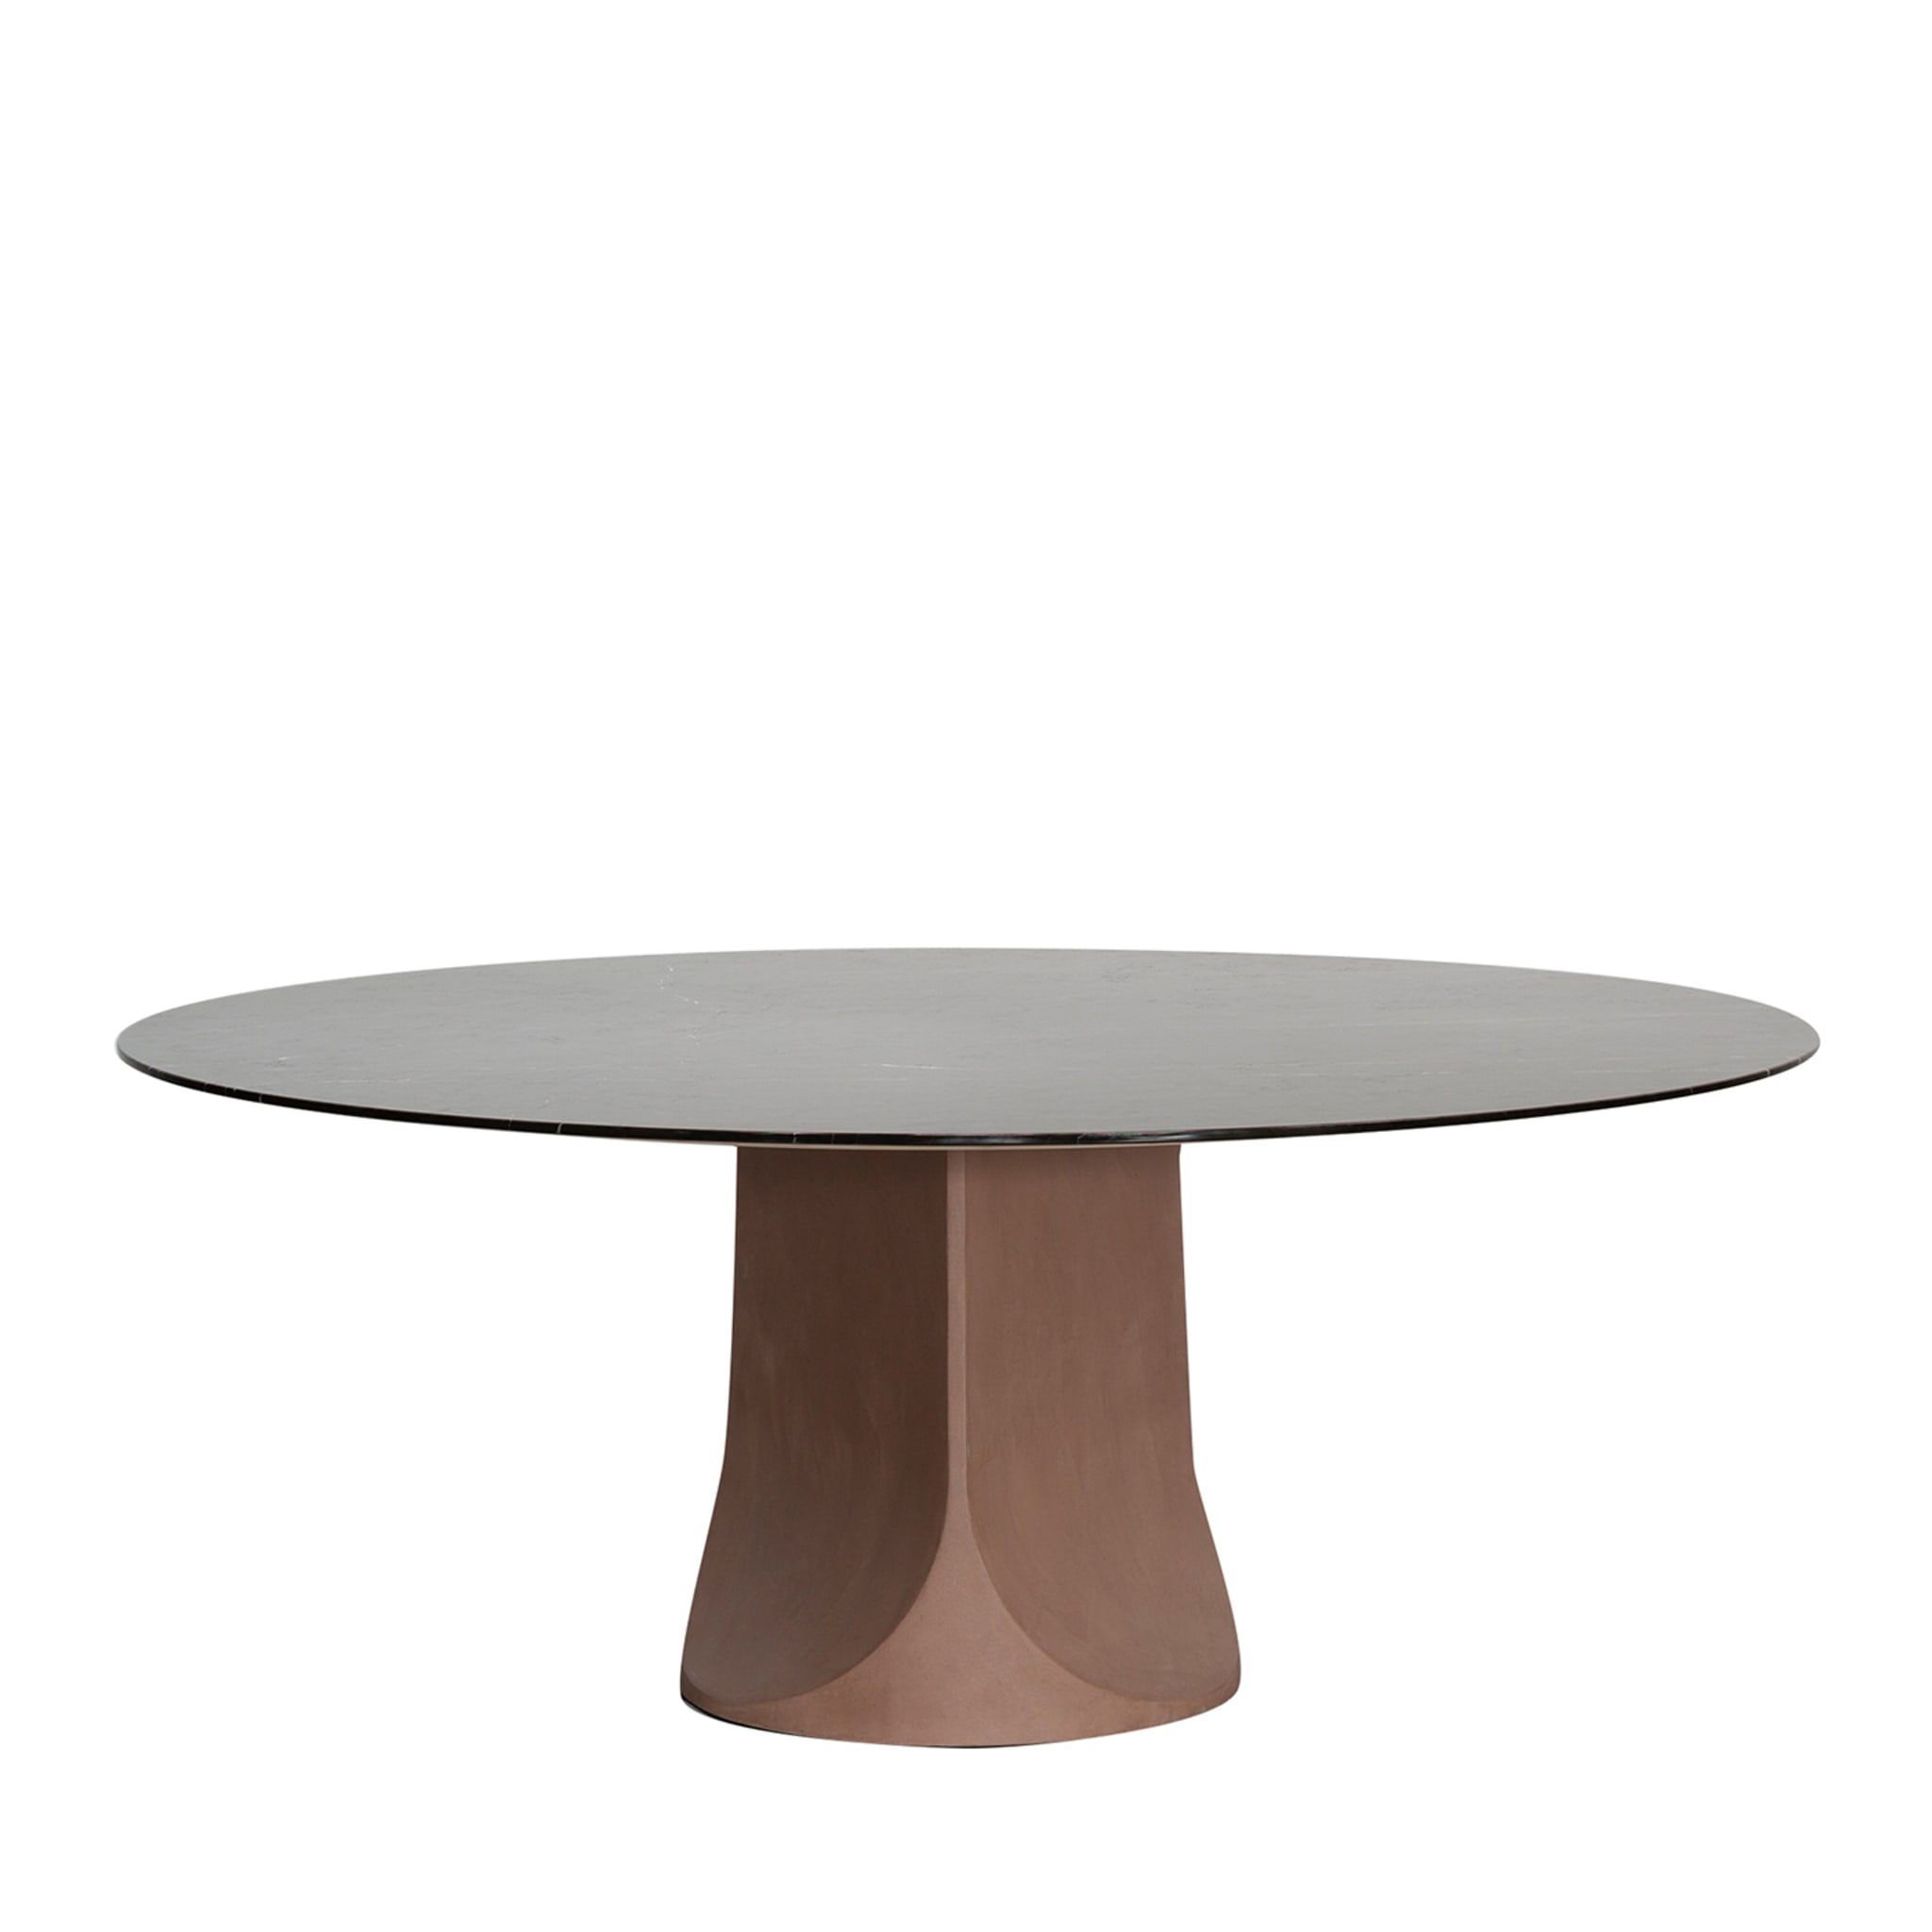 Togrul Round Table by Gordon Guillaumier - Main view